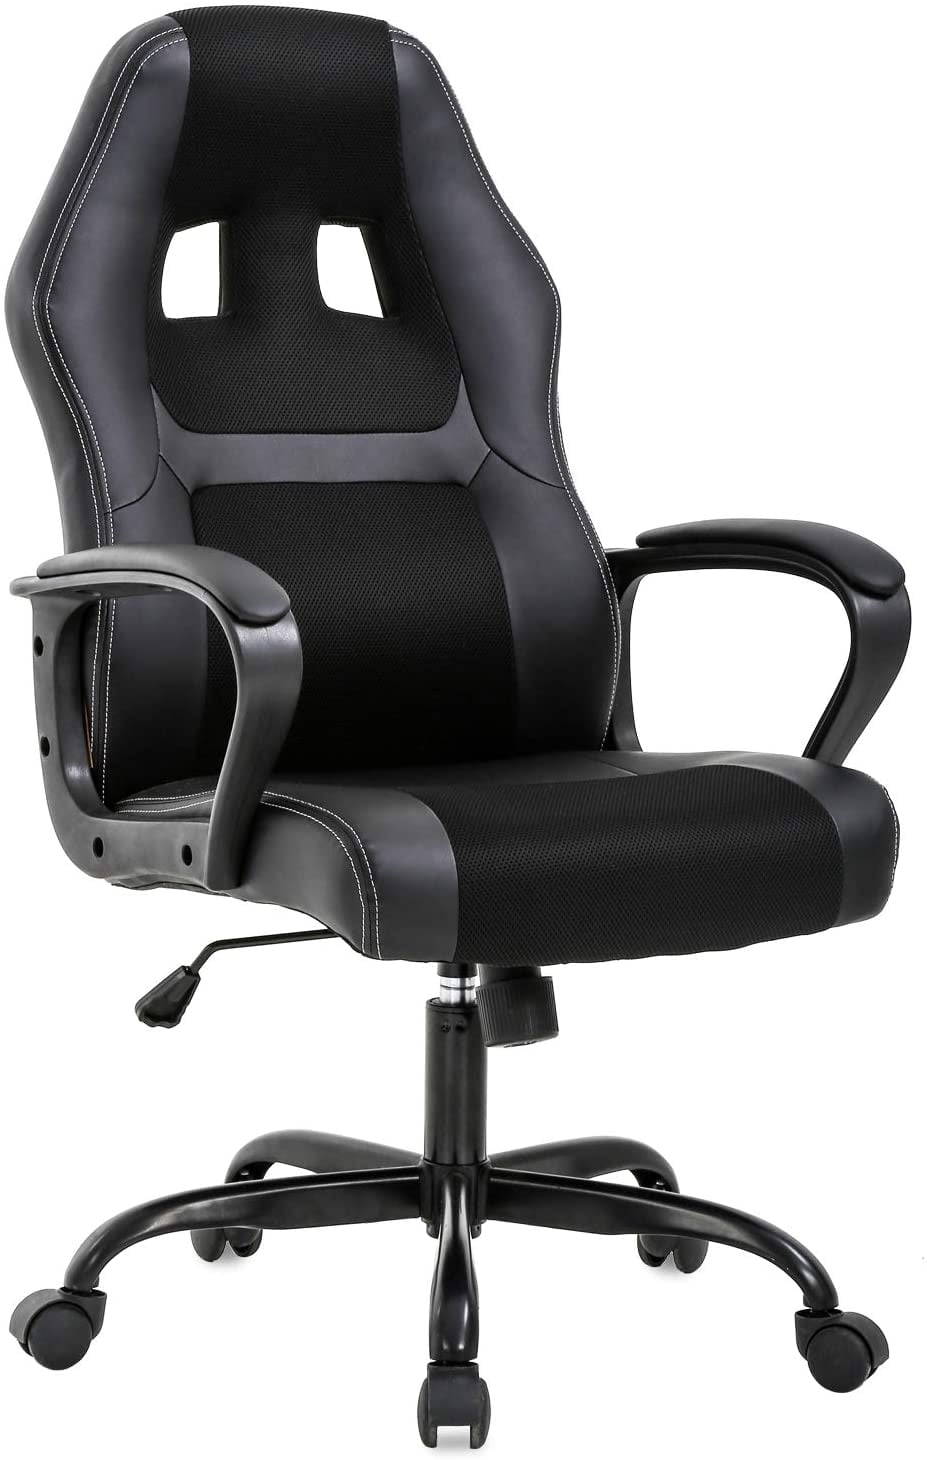 Enshey Gaming Chair Headrest and Lumbar Support PU Leather High Back Gamer Chairs Racing Style Office Desk Chair Ergonomic Computer Chair with Height Adjustment 